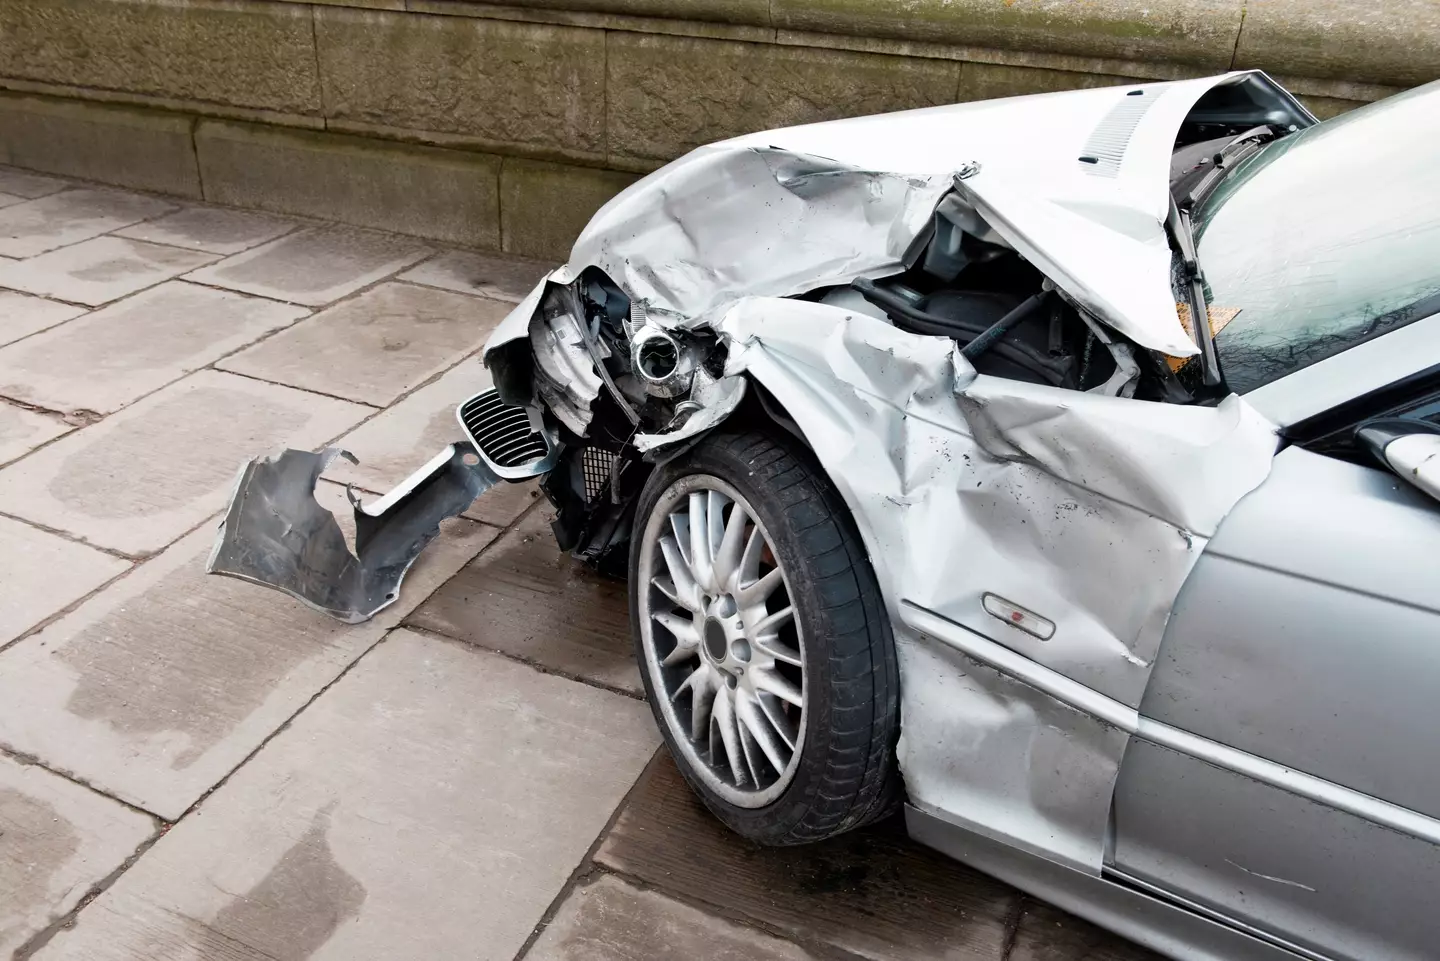 If you crash while 'fronting', your insurance is invalid.